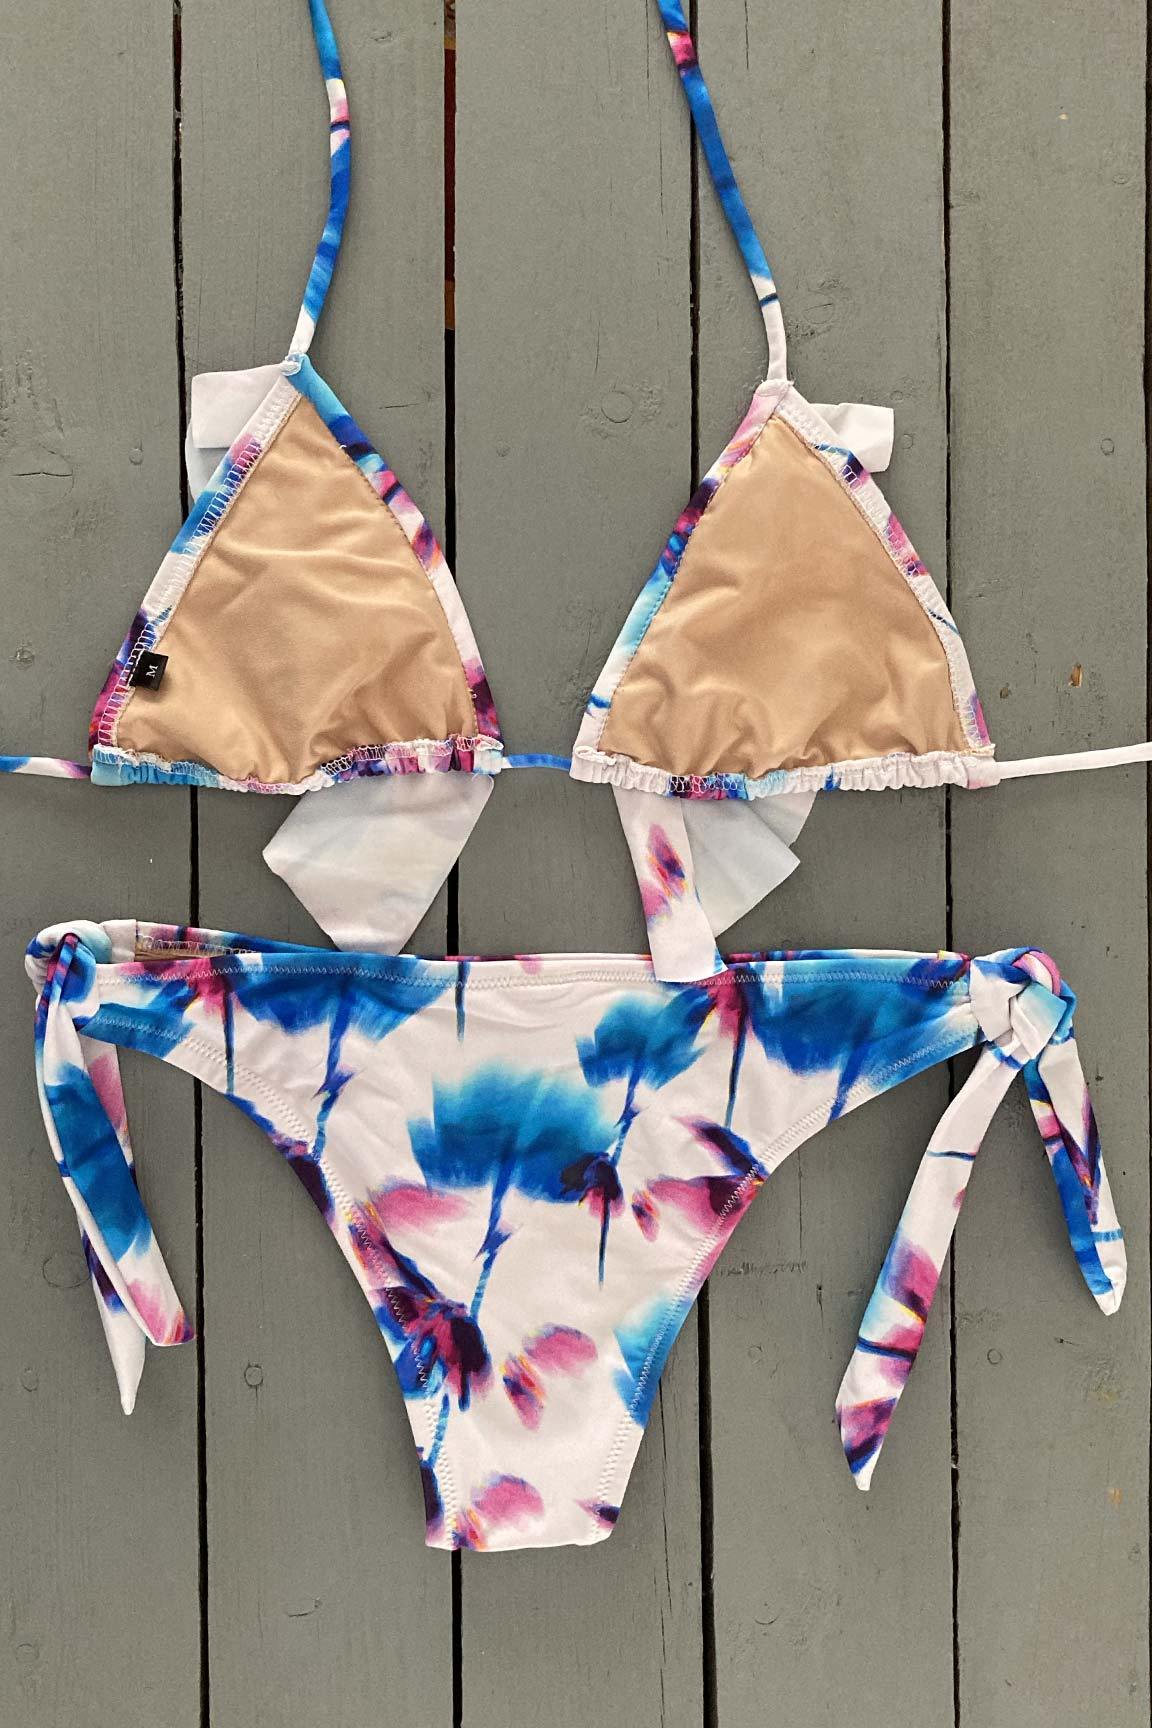 Enjoy days at the beach or pool in this floral print triangle bikini top with ruffle accent. This adjustable triangle bikini top is  made with the finest quality of soft and stretchy Lycra to achieve the best fit. Order yours today. @jillesbikinis 